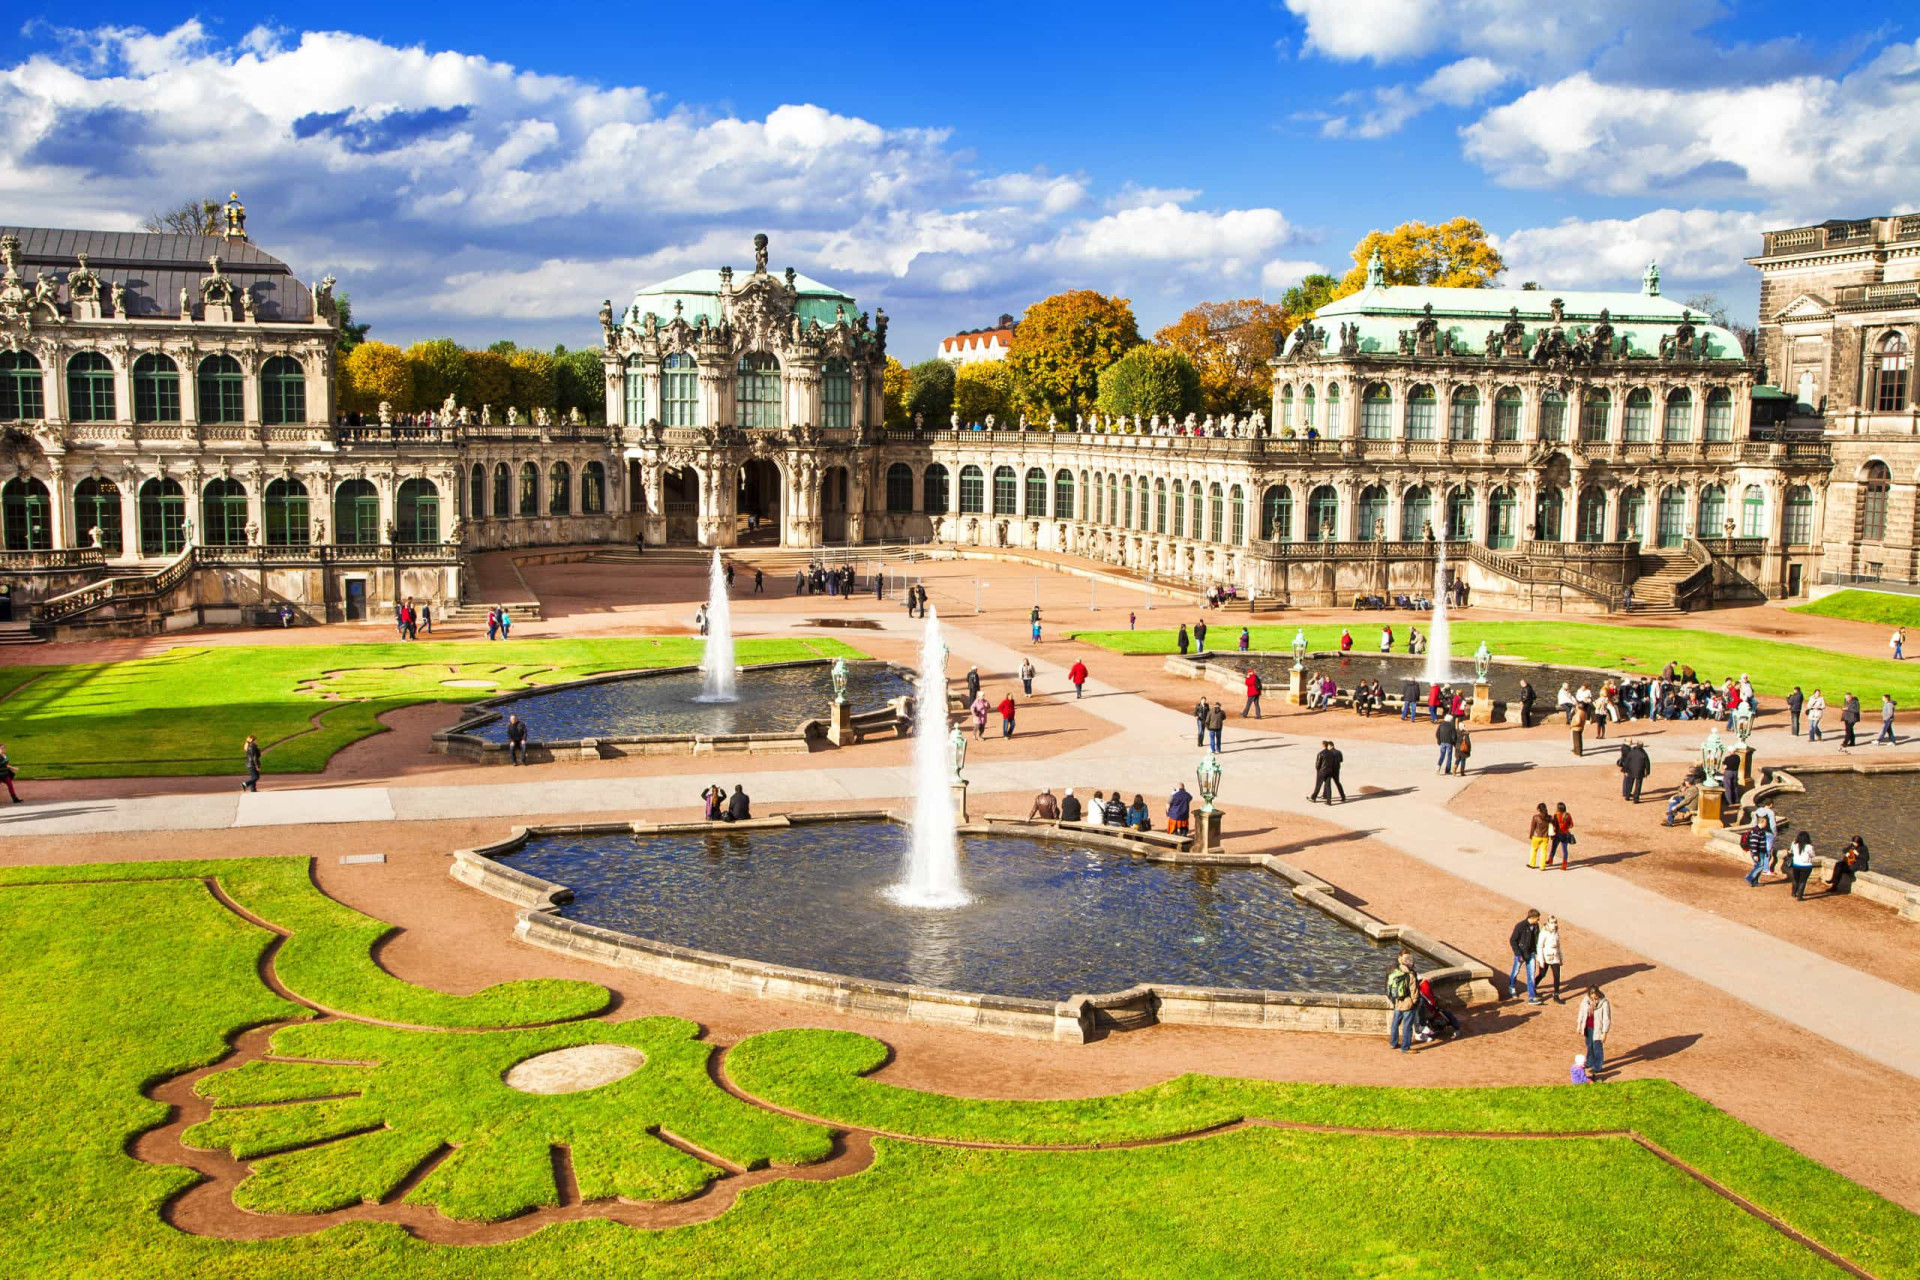 <p>One of Dresden's most famous landmarks is the Zwinger Palace, a palatial complex nesting within manicured grounds and celebrated for housing a collection of rare porcelain and an Old Masters gallery featuring works by Raphael, Vermeer, and Titian, among many others.</p><p><a href="https://www.msn.com/en-us/community/channel/vid-7xx8mnucu55yw63we9va2gwr7uihbxwc68fxqp25x6tg4ftibpra?cvid=94631541bc0f4f89bfd59158d696ad7e">Follow us and access great exclusive content every day</a></p>